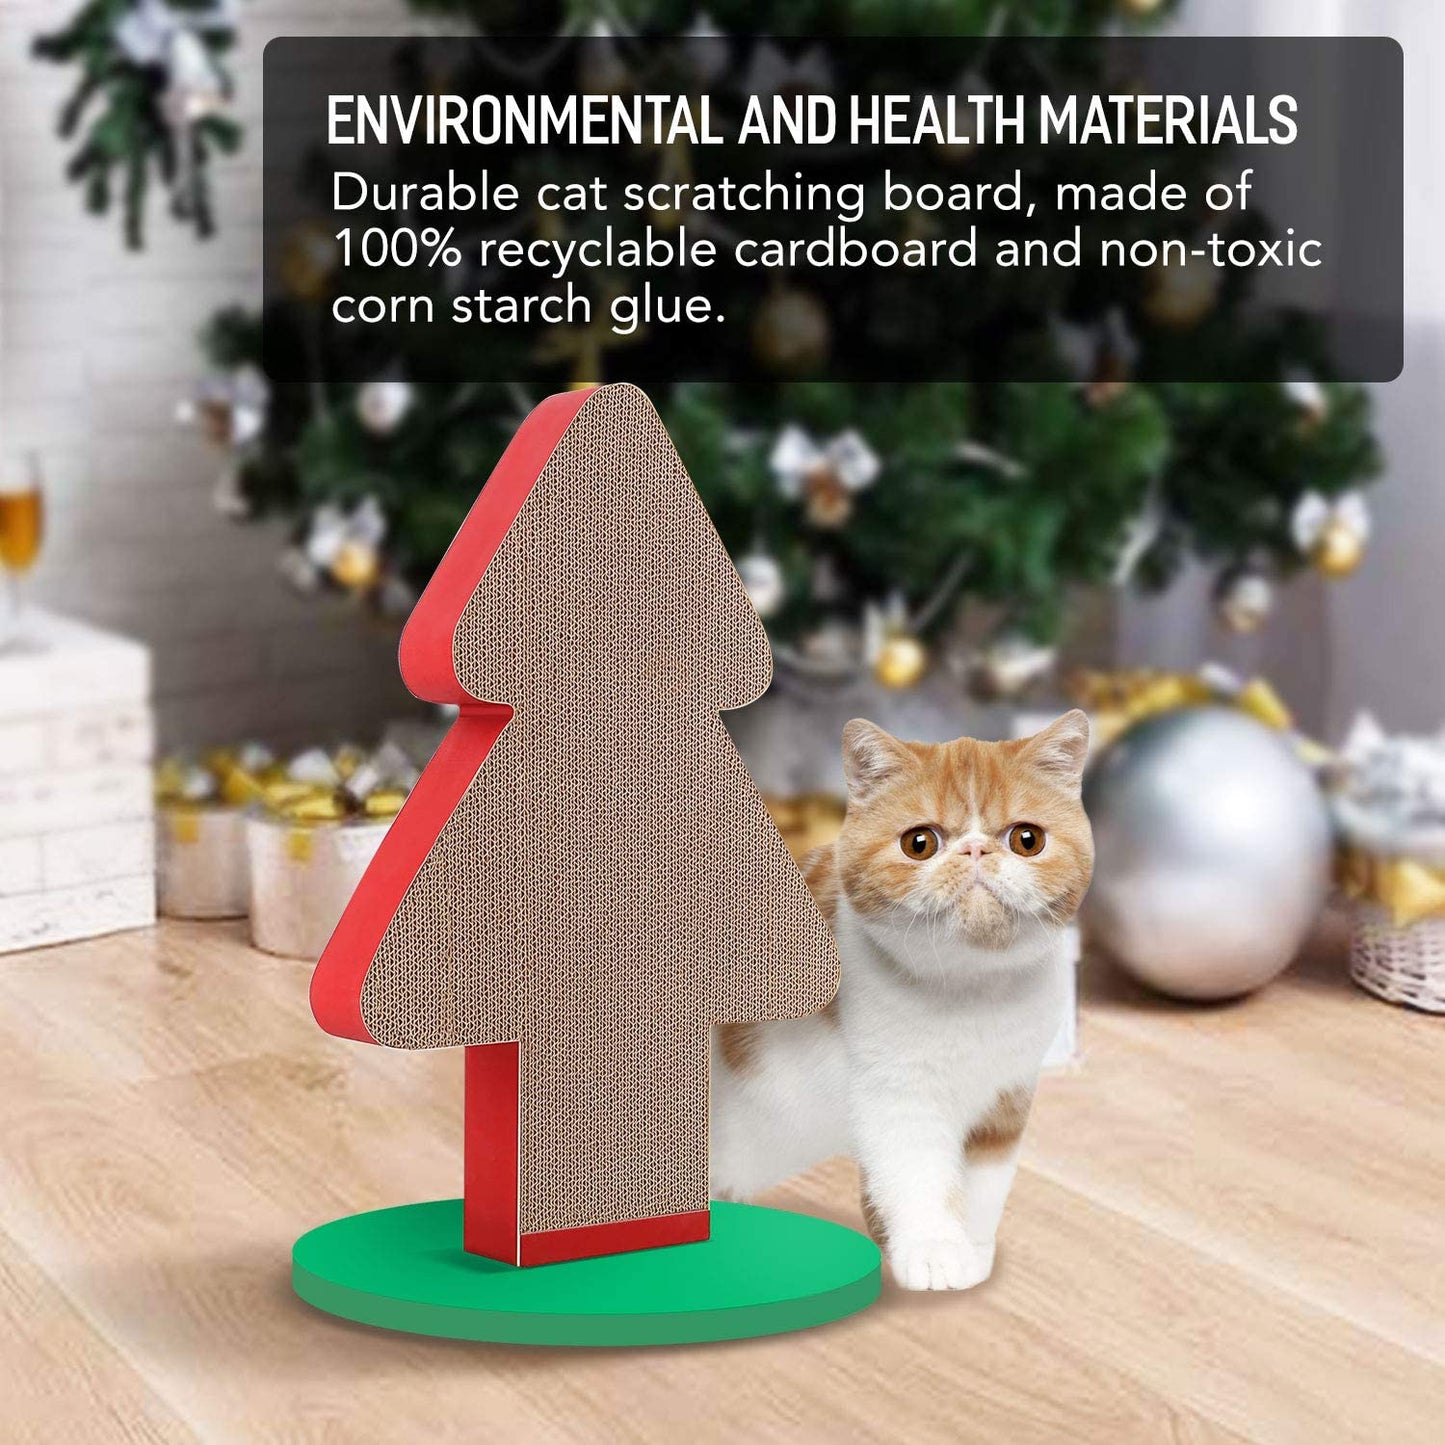 Scratchme Cat Scratcher Post Cardboard, Christmas Tree Shape Cat Scratching Lounge Bed, Durable Pad Prevents Furniture Damage, 1-Pack